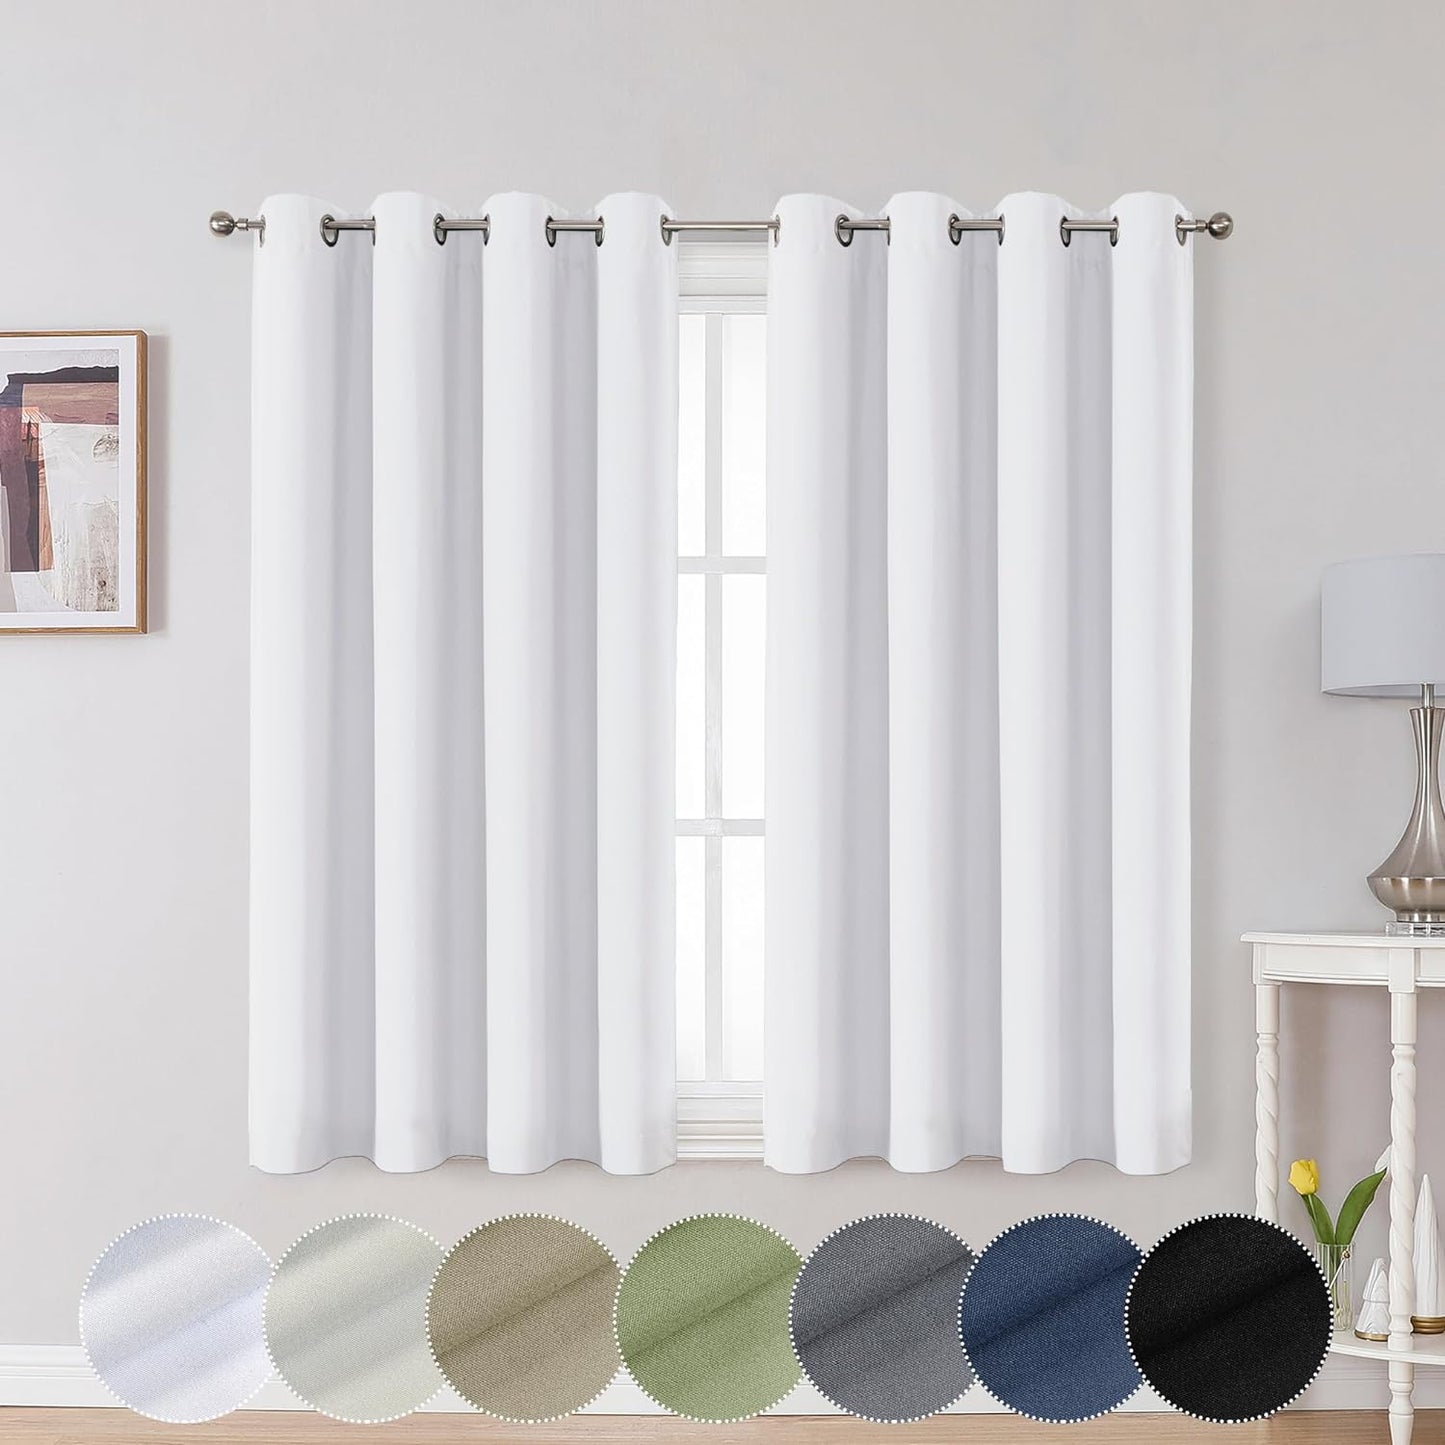 OWENIE Maya 100% Blackout Curtains 84 Inch Length 2 Panels Set, Greyish White Solid Heavy Thermal Insulated Grommets Curtains for Bedroom & Living Room, 2 Panels (Each 52 W X 84 L,Greyish White)  OWENIE Greyish White 52W X 45L 